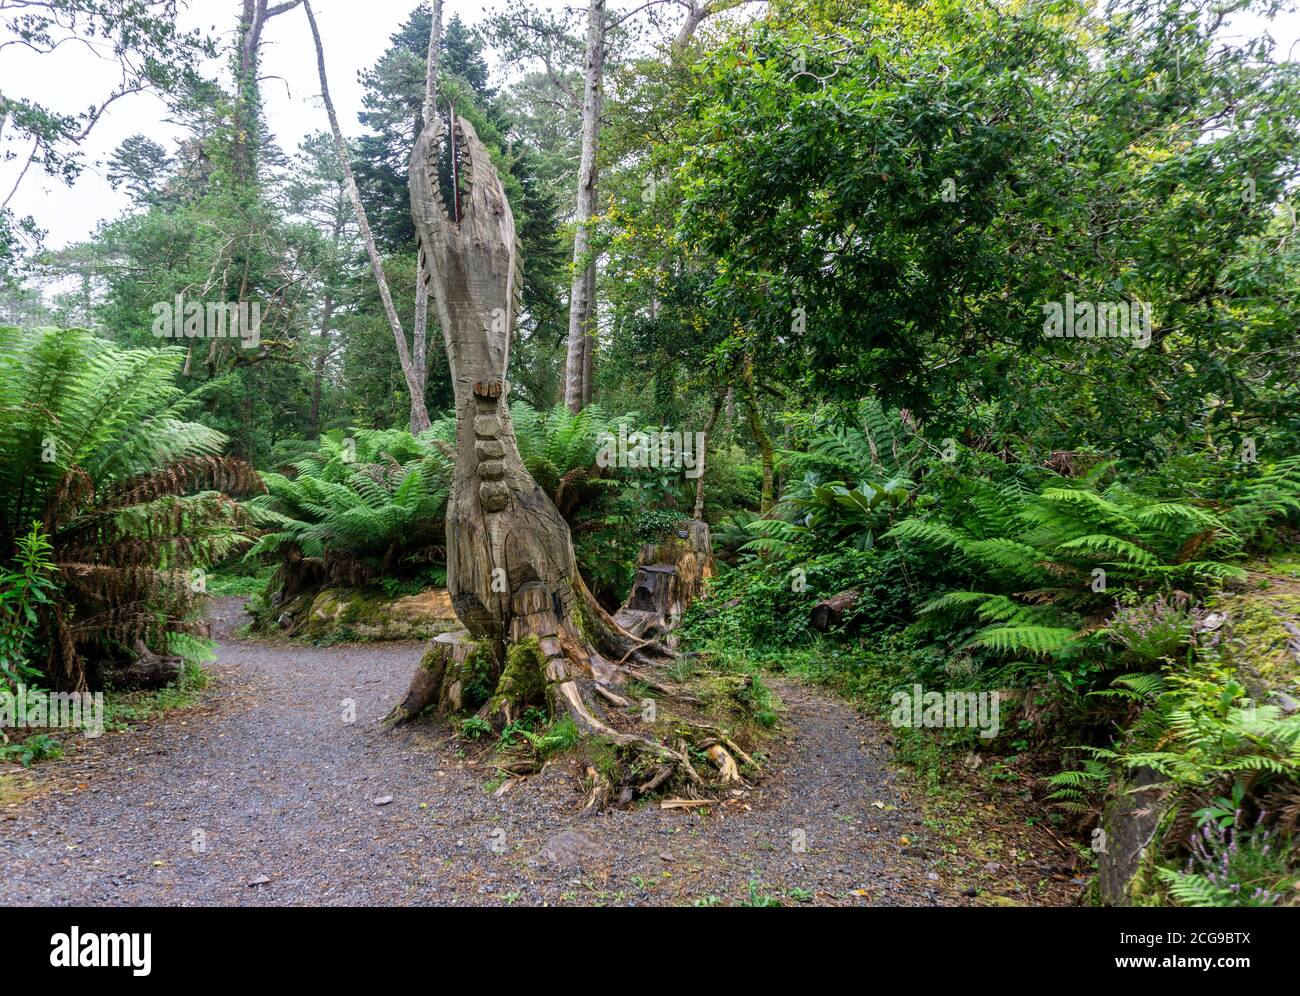 A dead tree sculpted into a dinosaur by Pieter Koning in Kells Bay Gardens in Kells, County Kerry, Ireland. Stock Photo